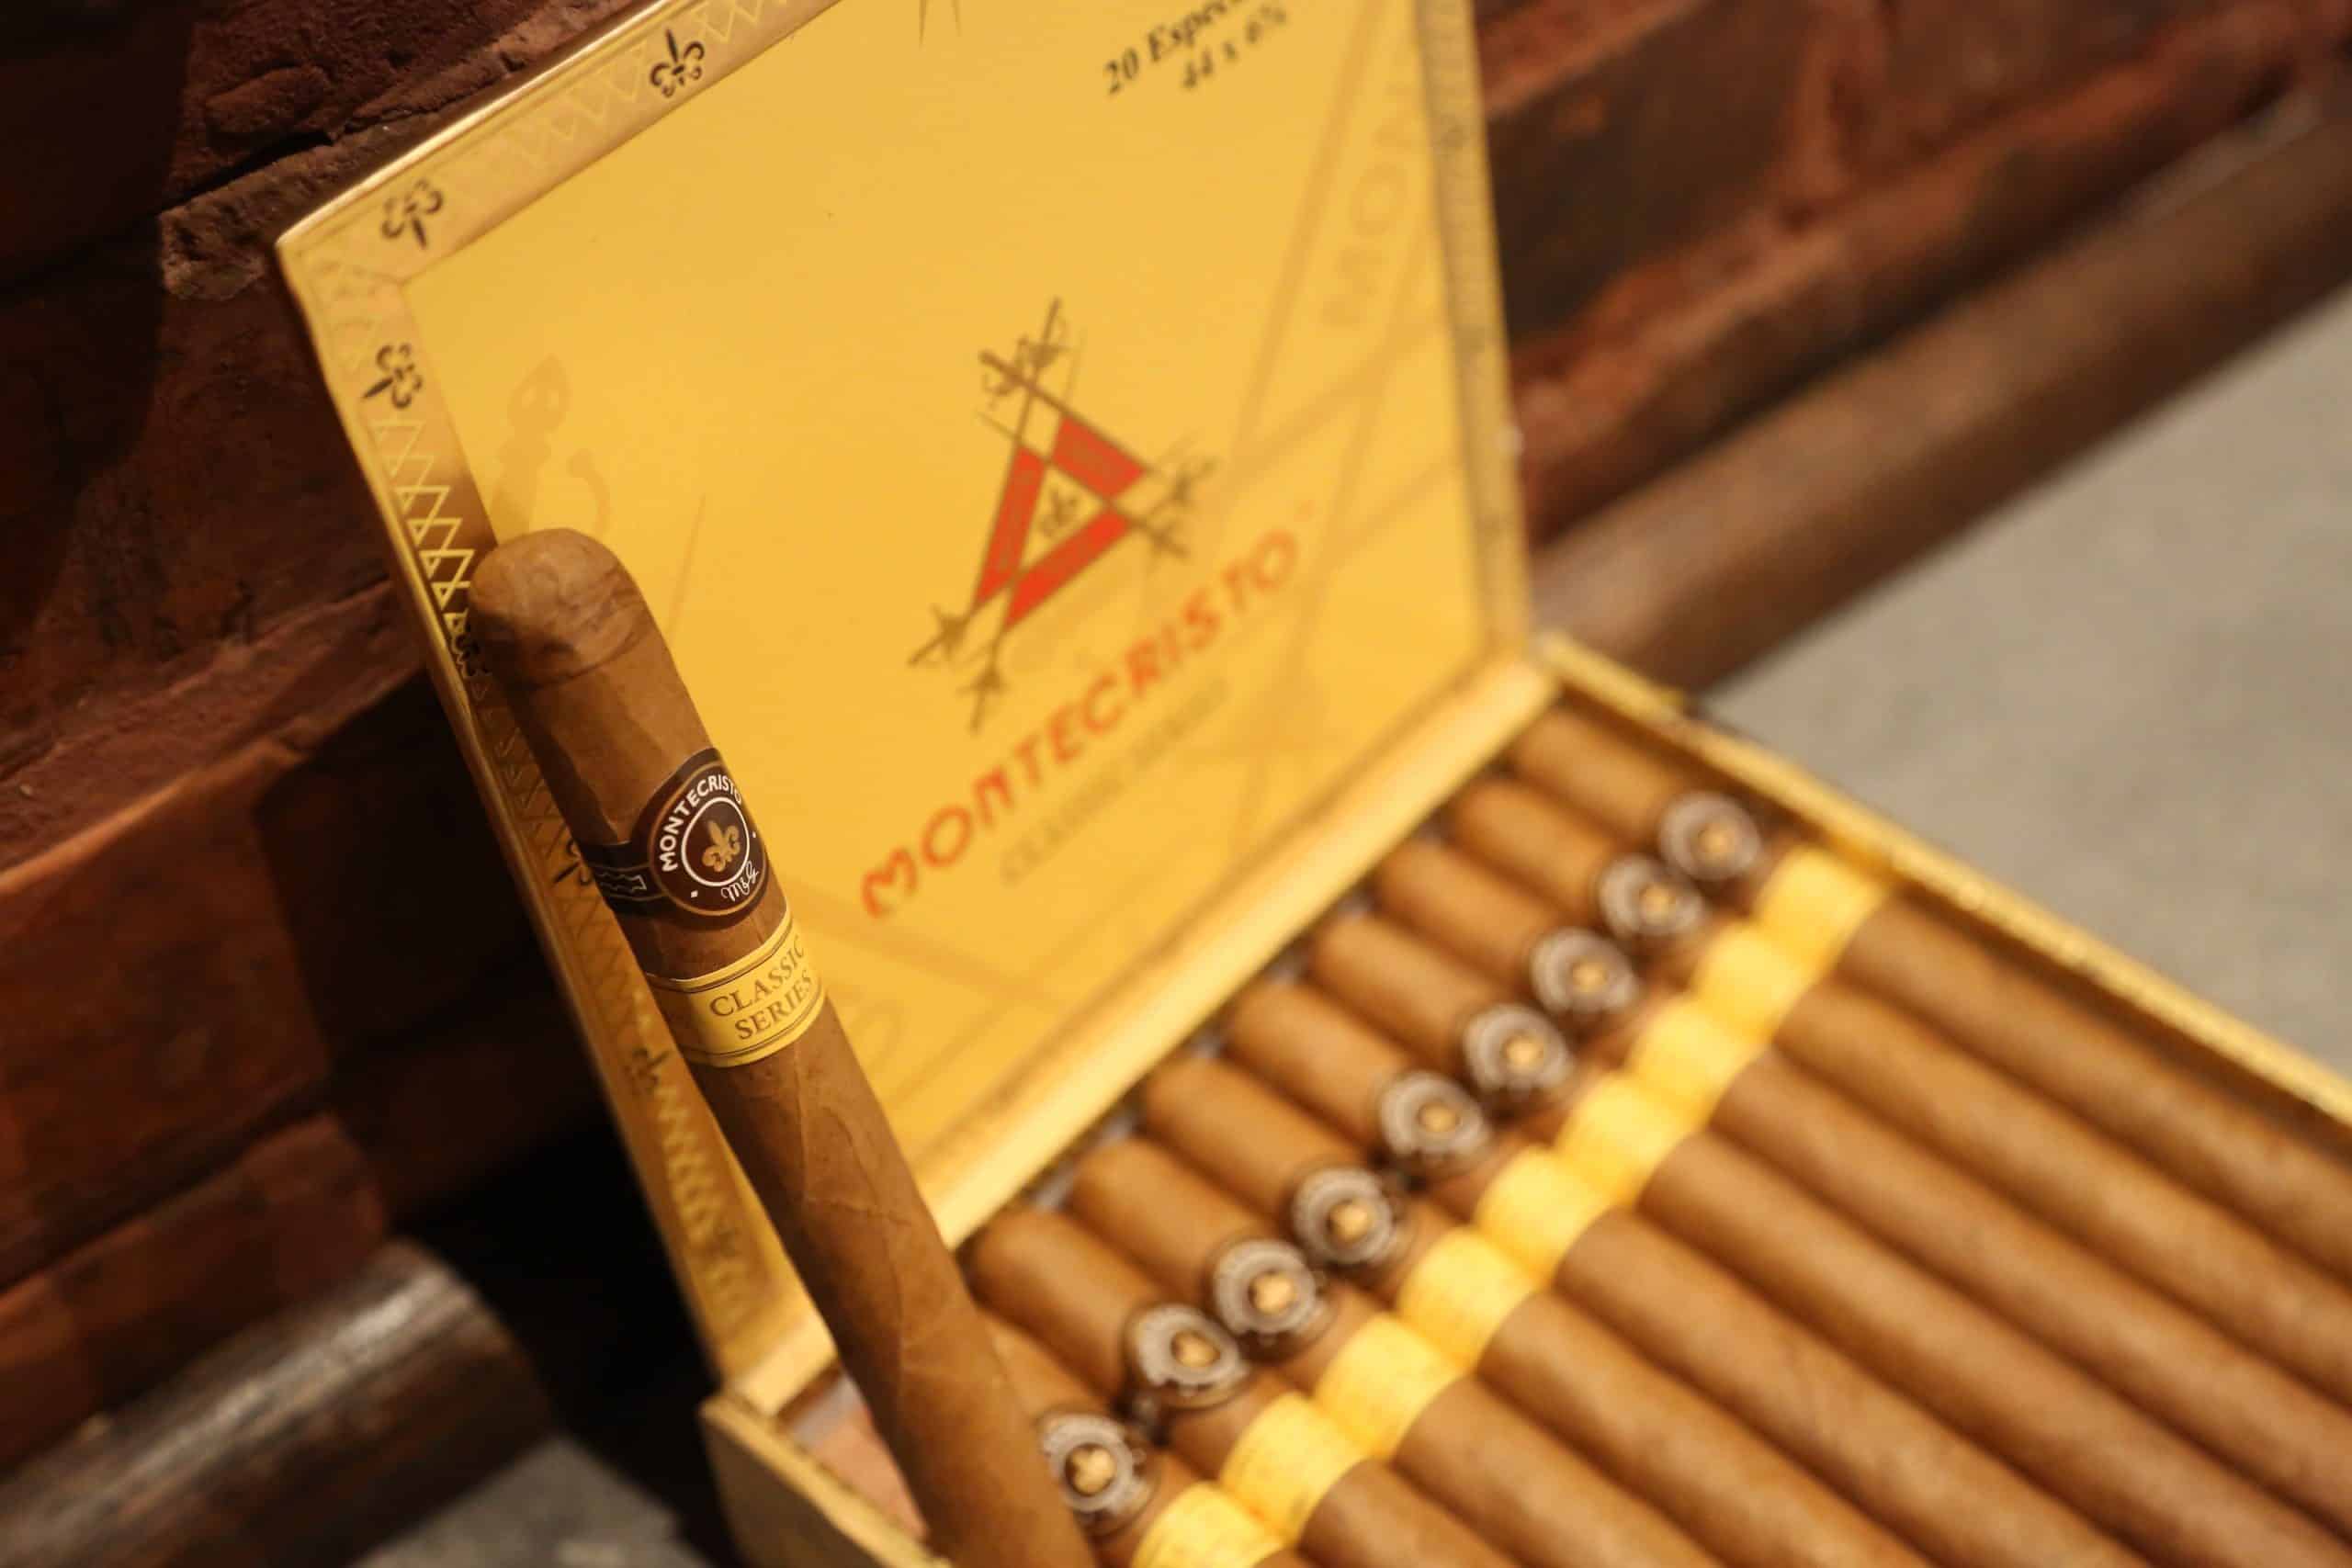 Single cigar leaning on an open box of Montecristo Classic Series cigars